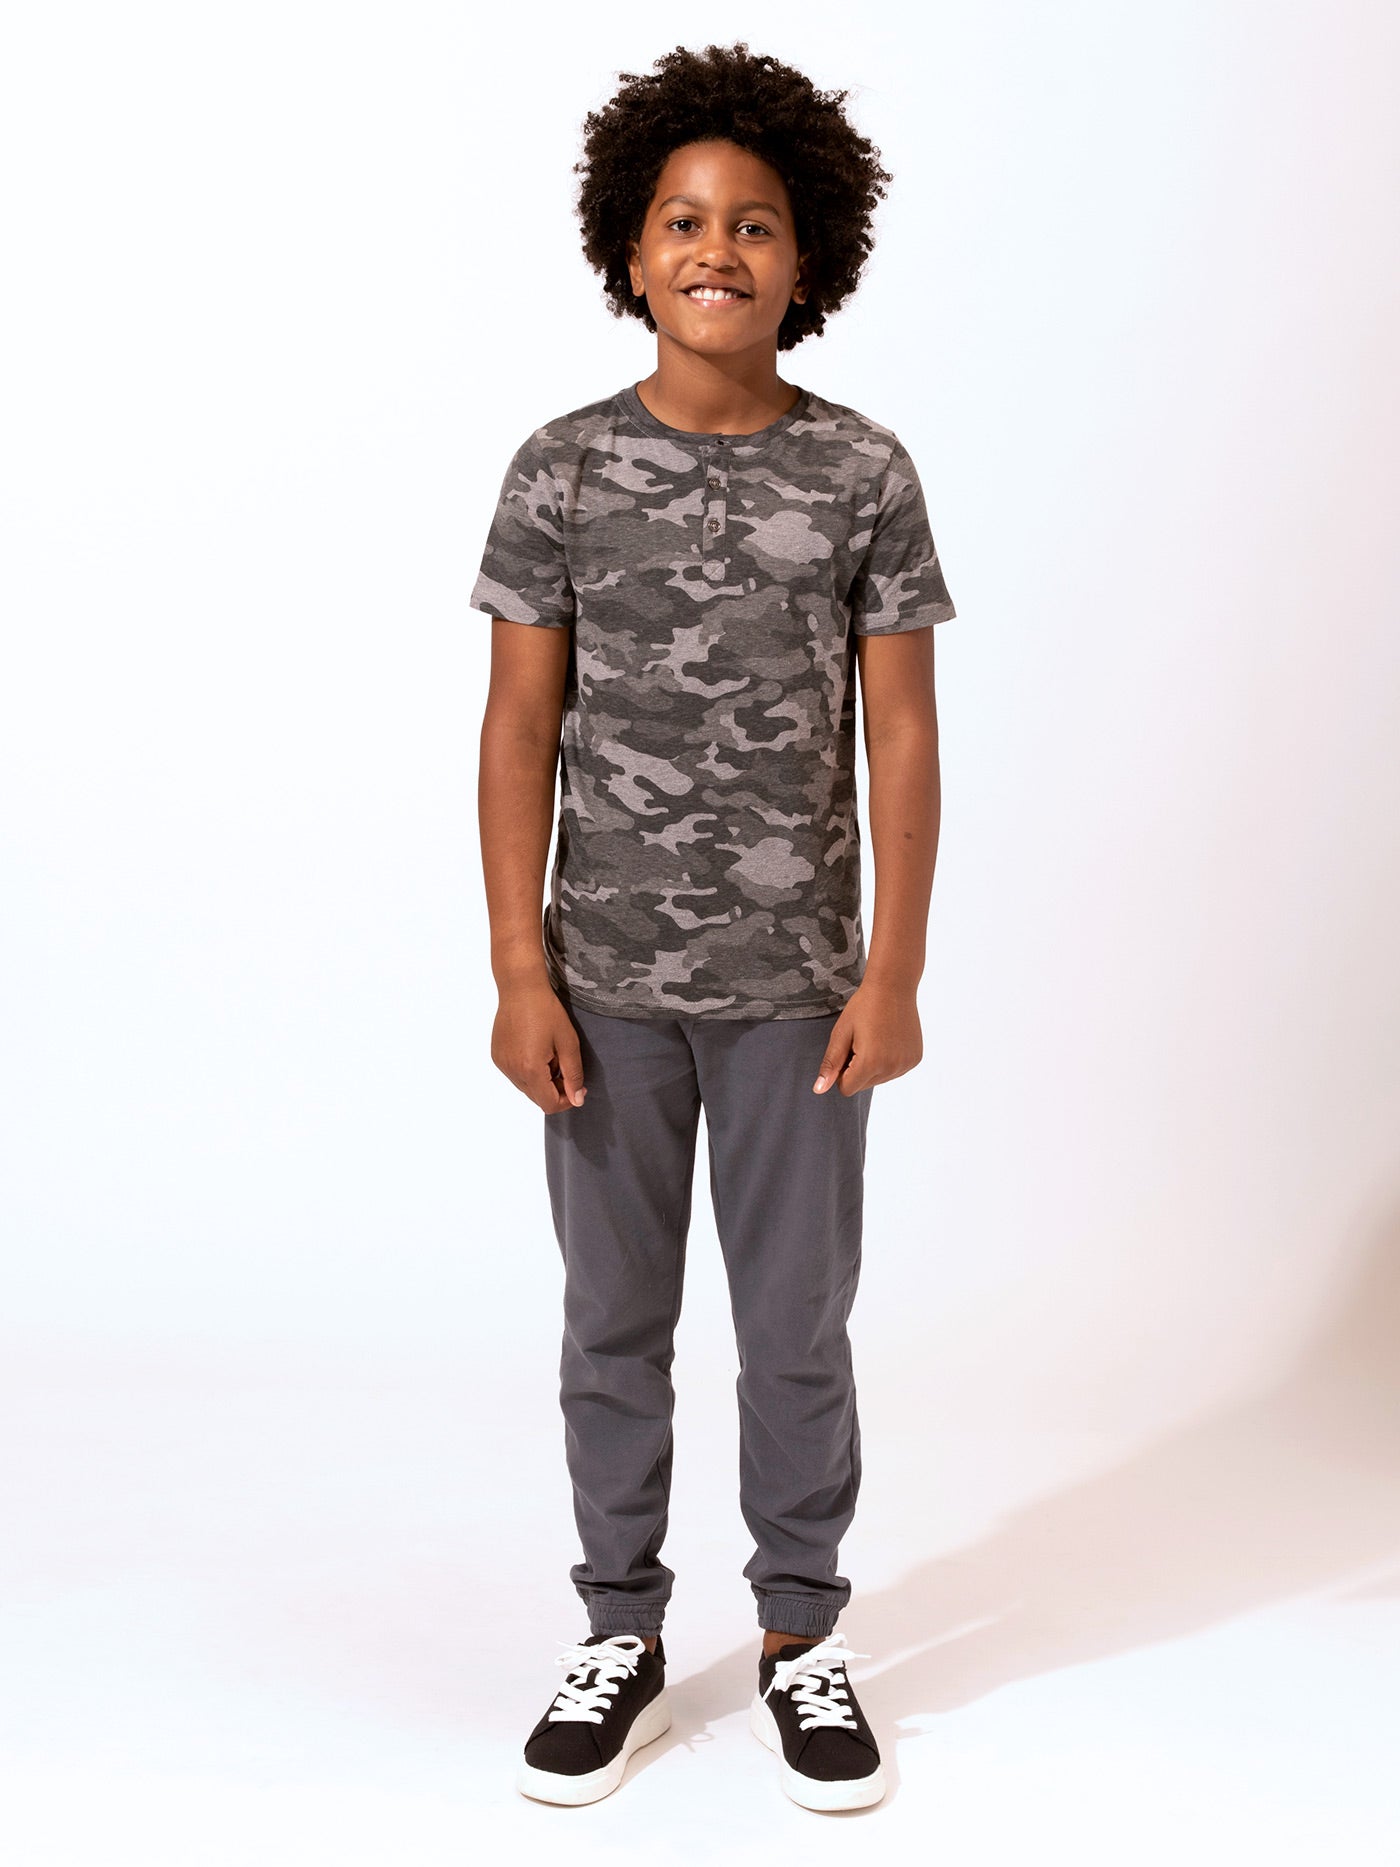 Threads Thought Tops 4 – Boy\'s